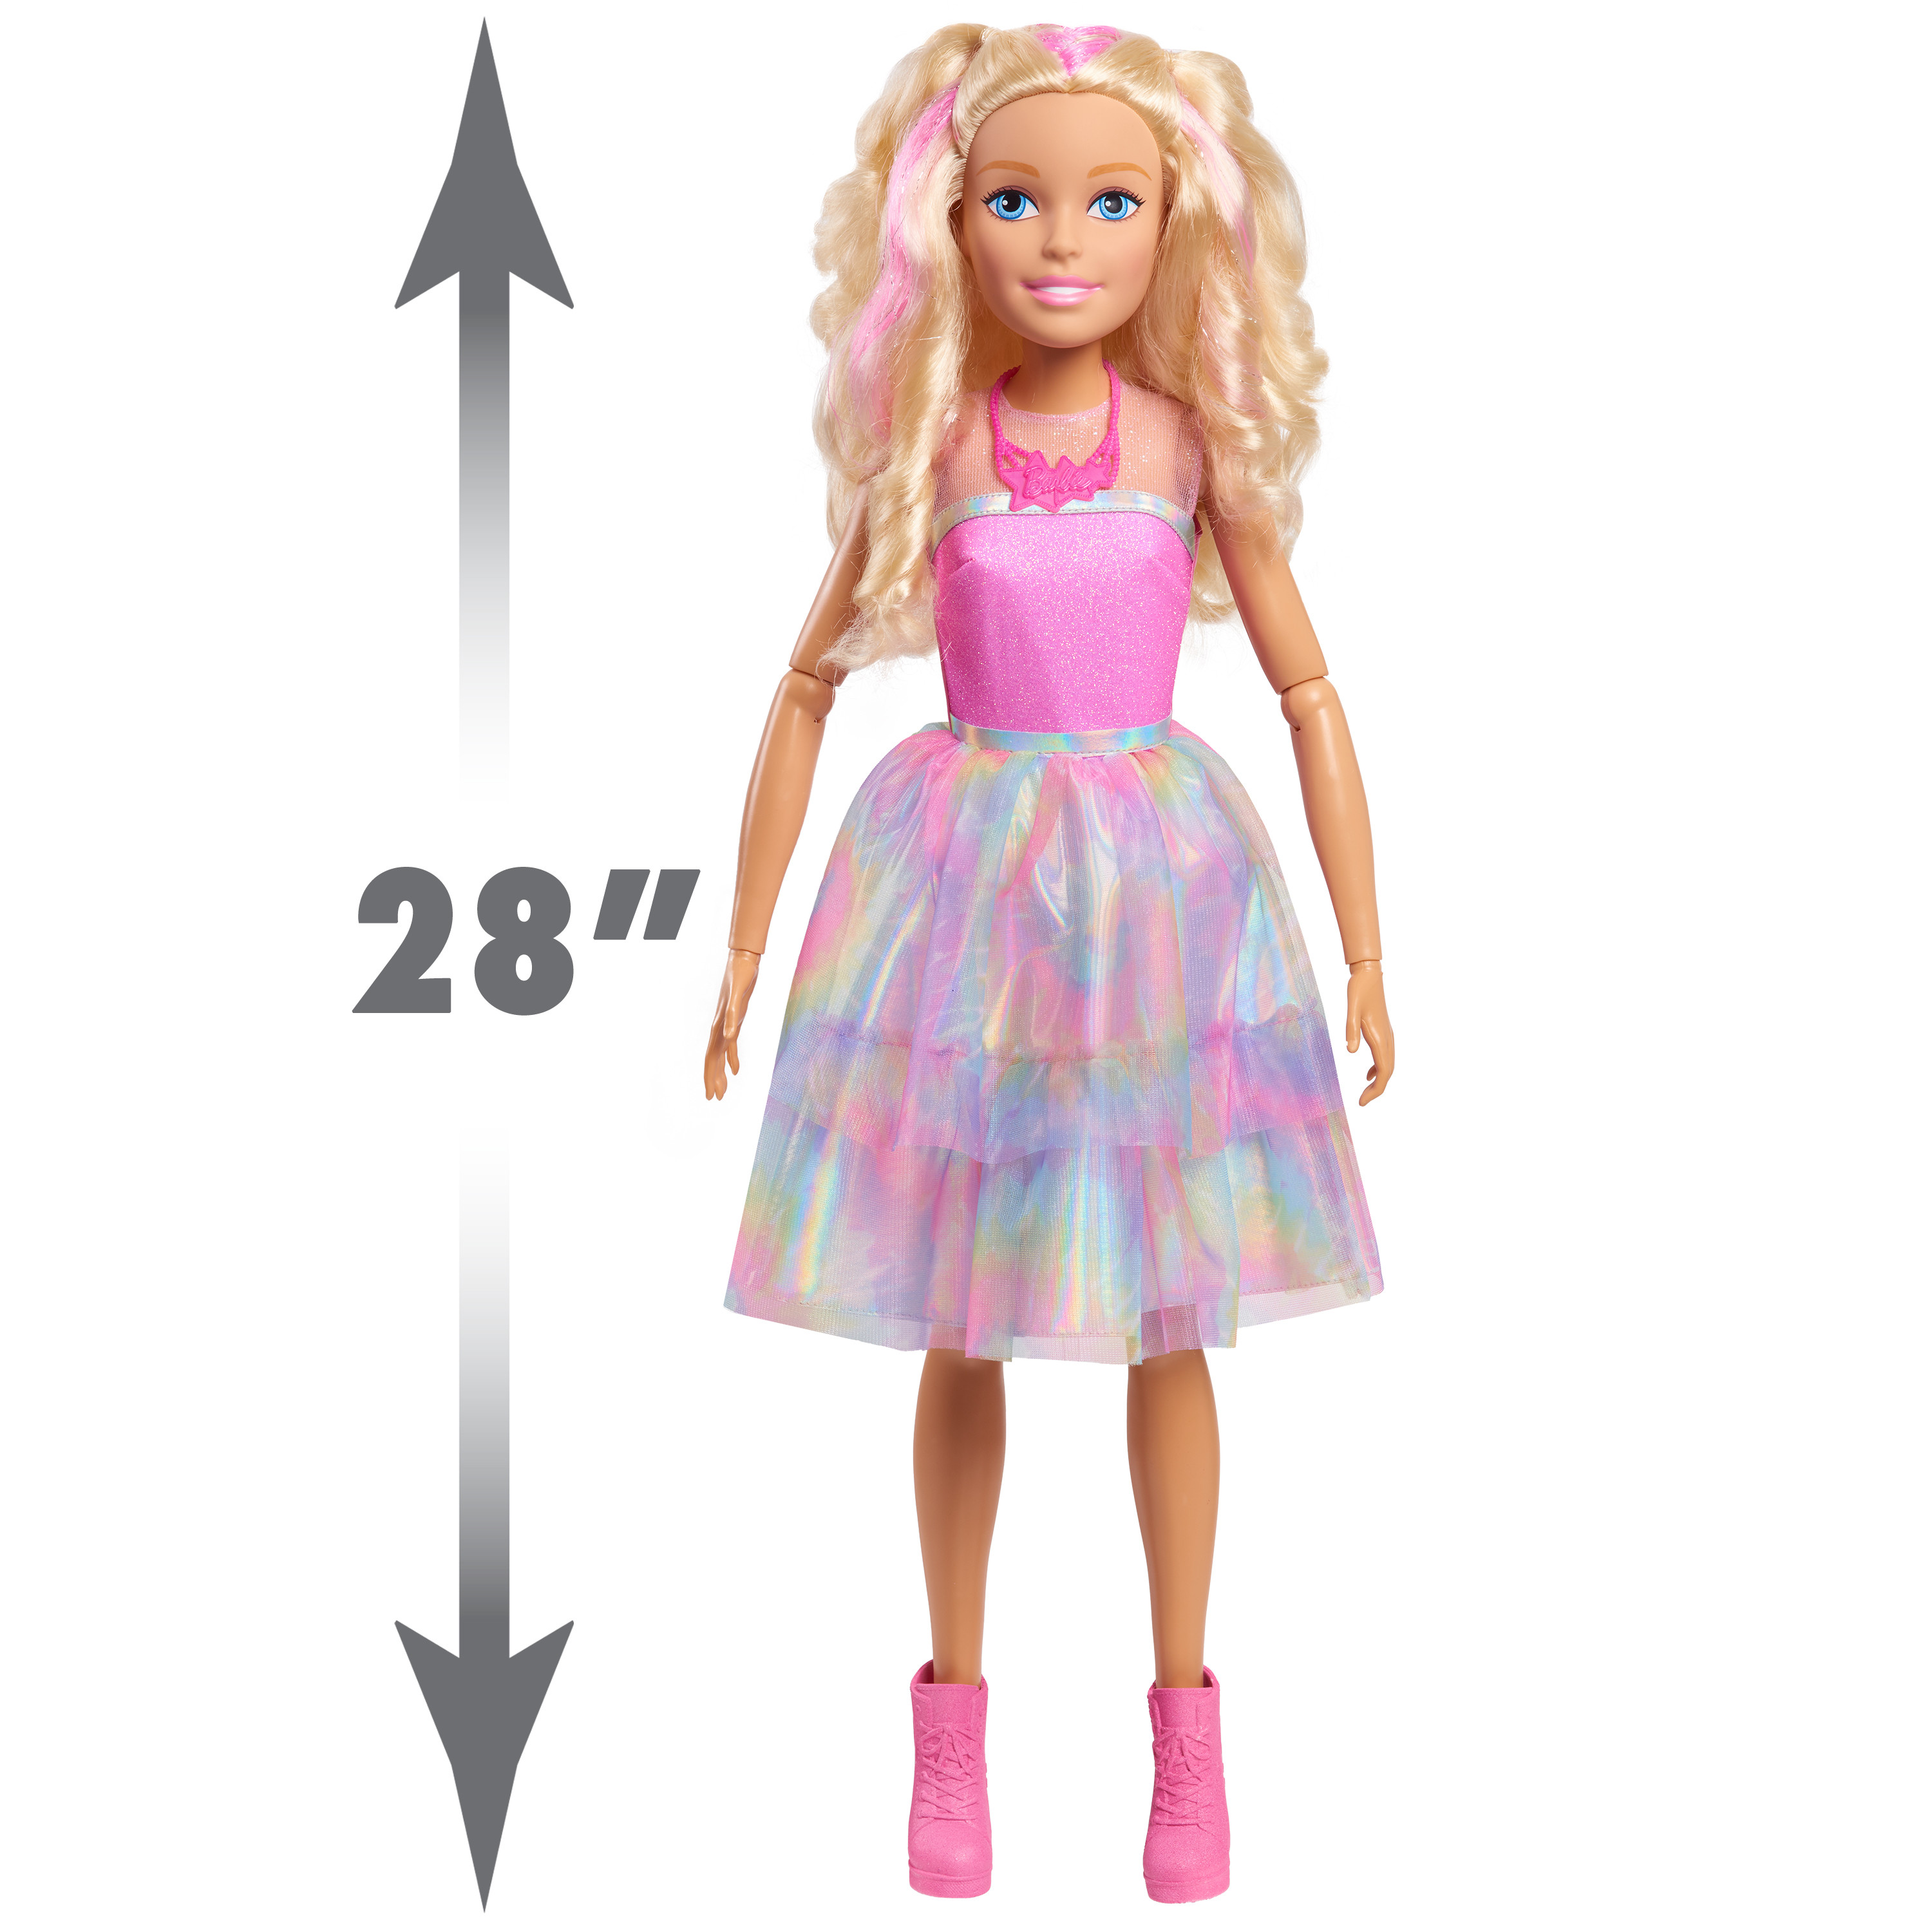 Barbie 28-Inch Tie Dye Style Best Fashion Friend, Blonde Hair,  Kids Toys for Ages 3 Up, Gifts and Presents - image 4 of 10